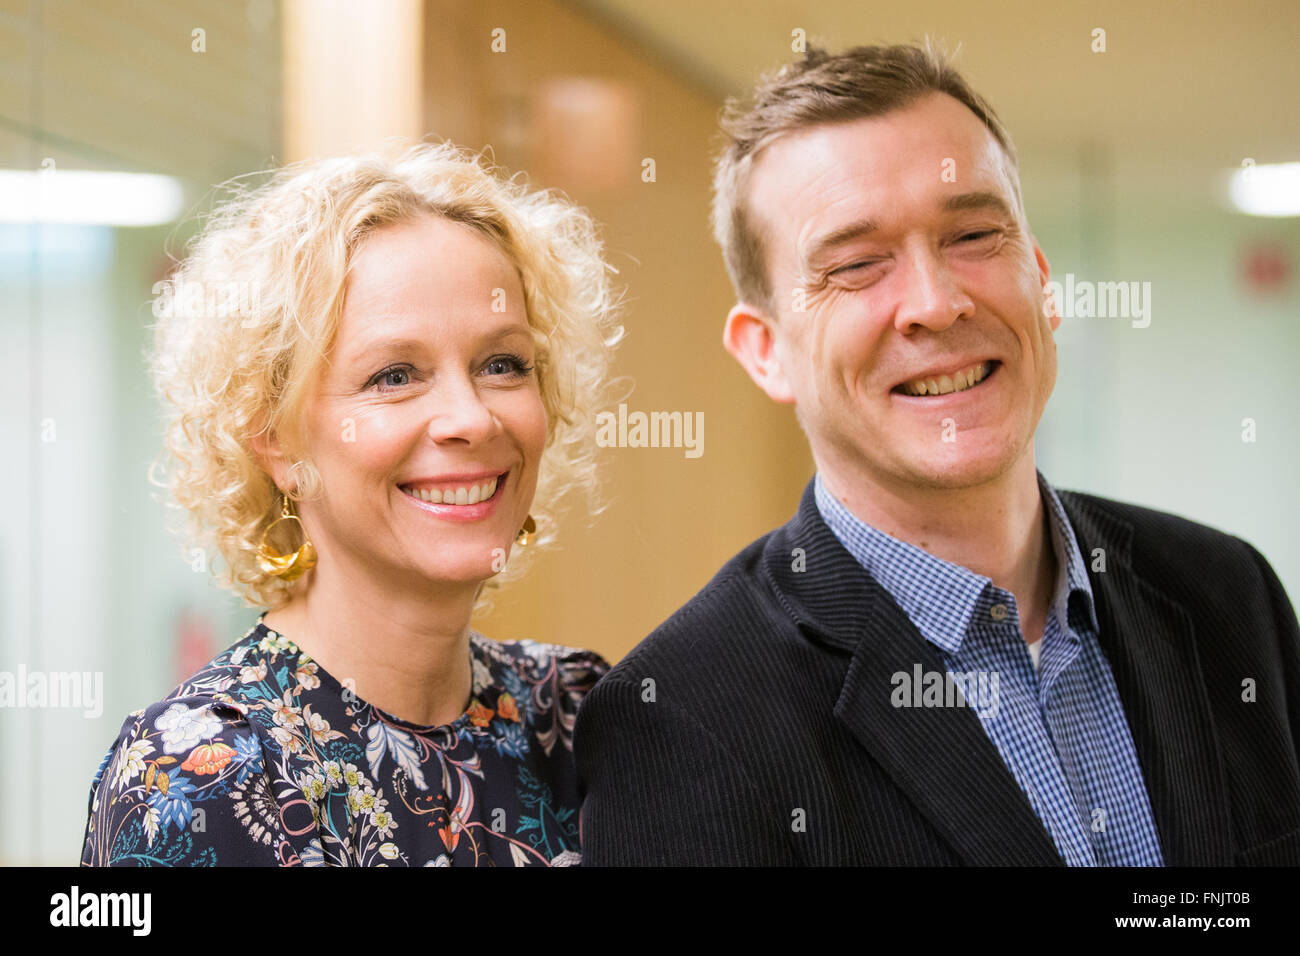 Cologne, Germany. 15th Mar, 2016. British writer David Mitchell (R) and German actress Katja Riemann pose at the international literature festival Lit.Cologne in Cologne, Germany, 15 March 2016. Mitchell's new book 'The Bone Clocks' is a metaphysical thriller, a moral treatment and chronicle of our self-destructive actions. Lit.Cologne, Europe's largest literature festival according to the organisers, runs until 19 March 2016. Photo: ROLF VENNENBERND/dpa/Alamy Live News Stock Photo